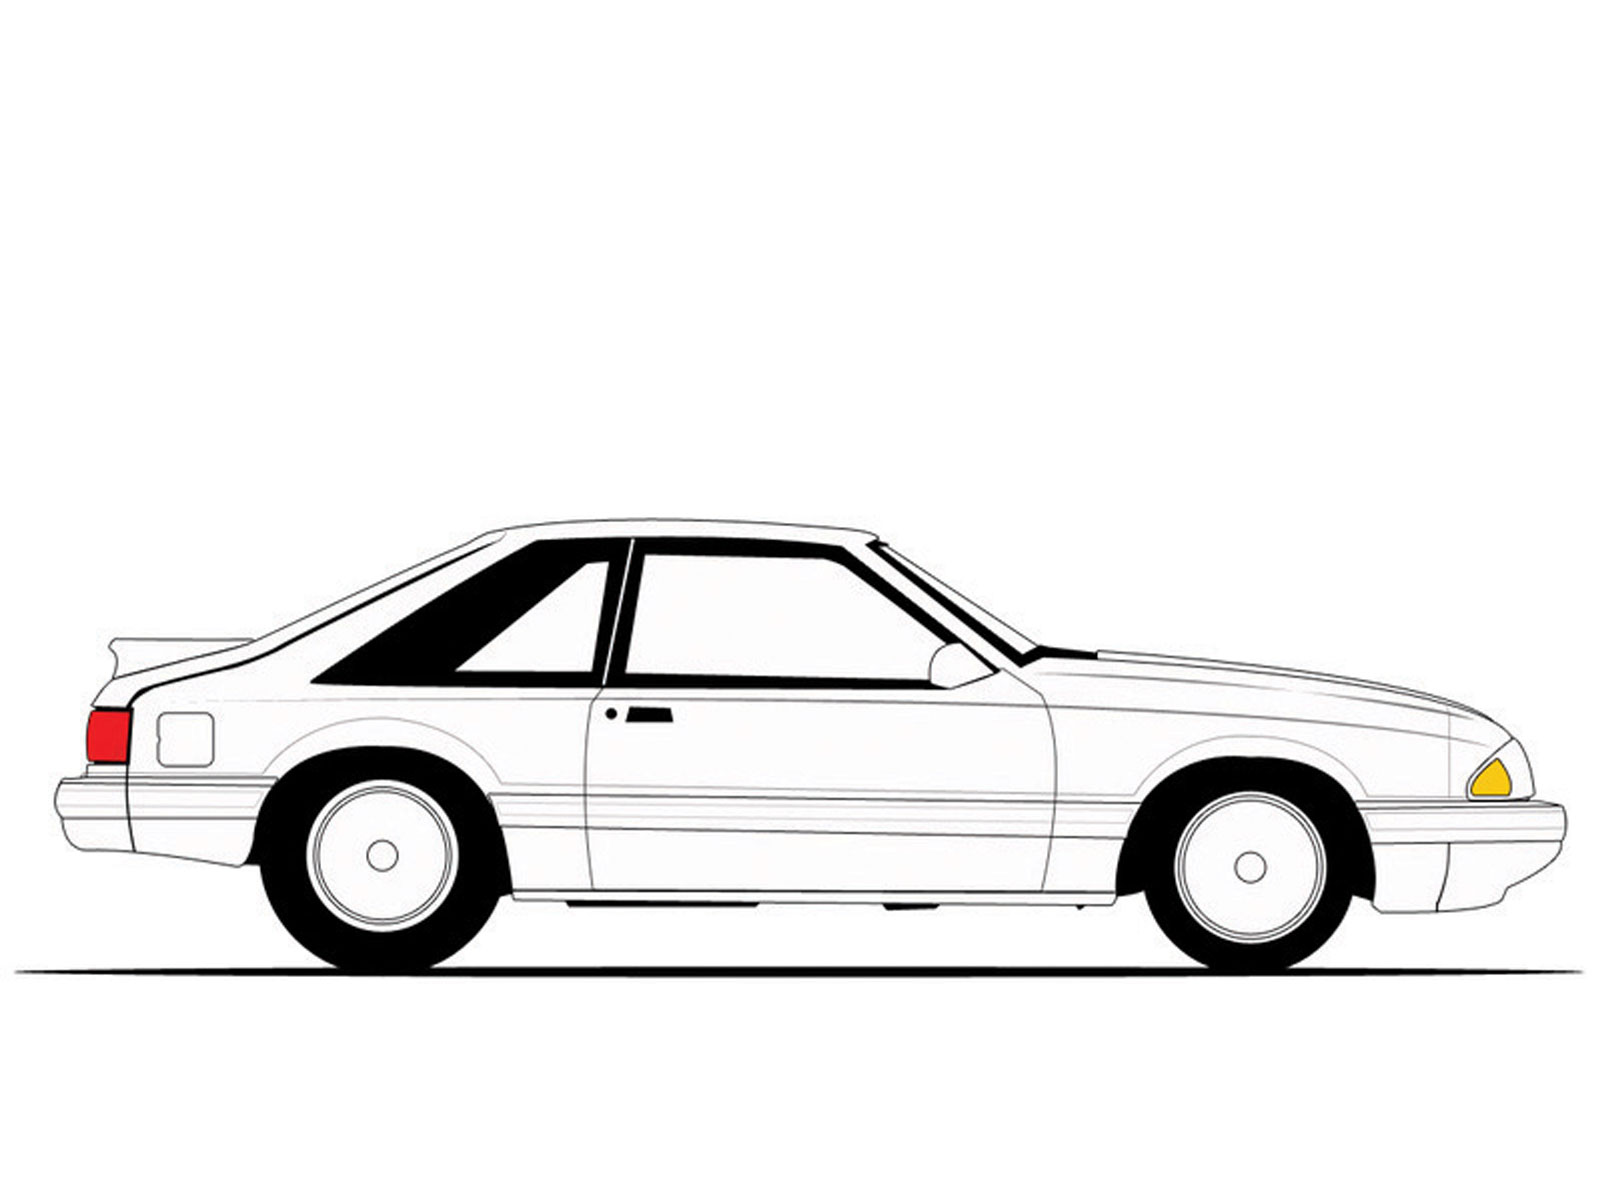 Red mustang fox body convertible clipart